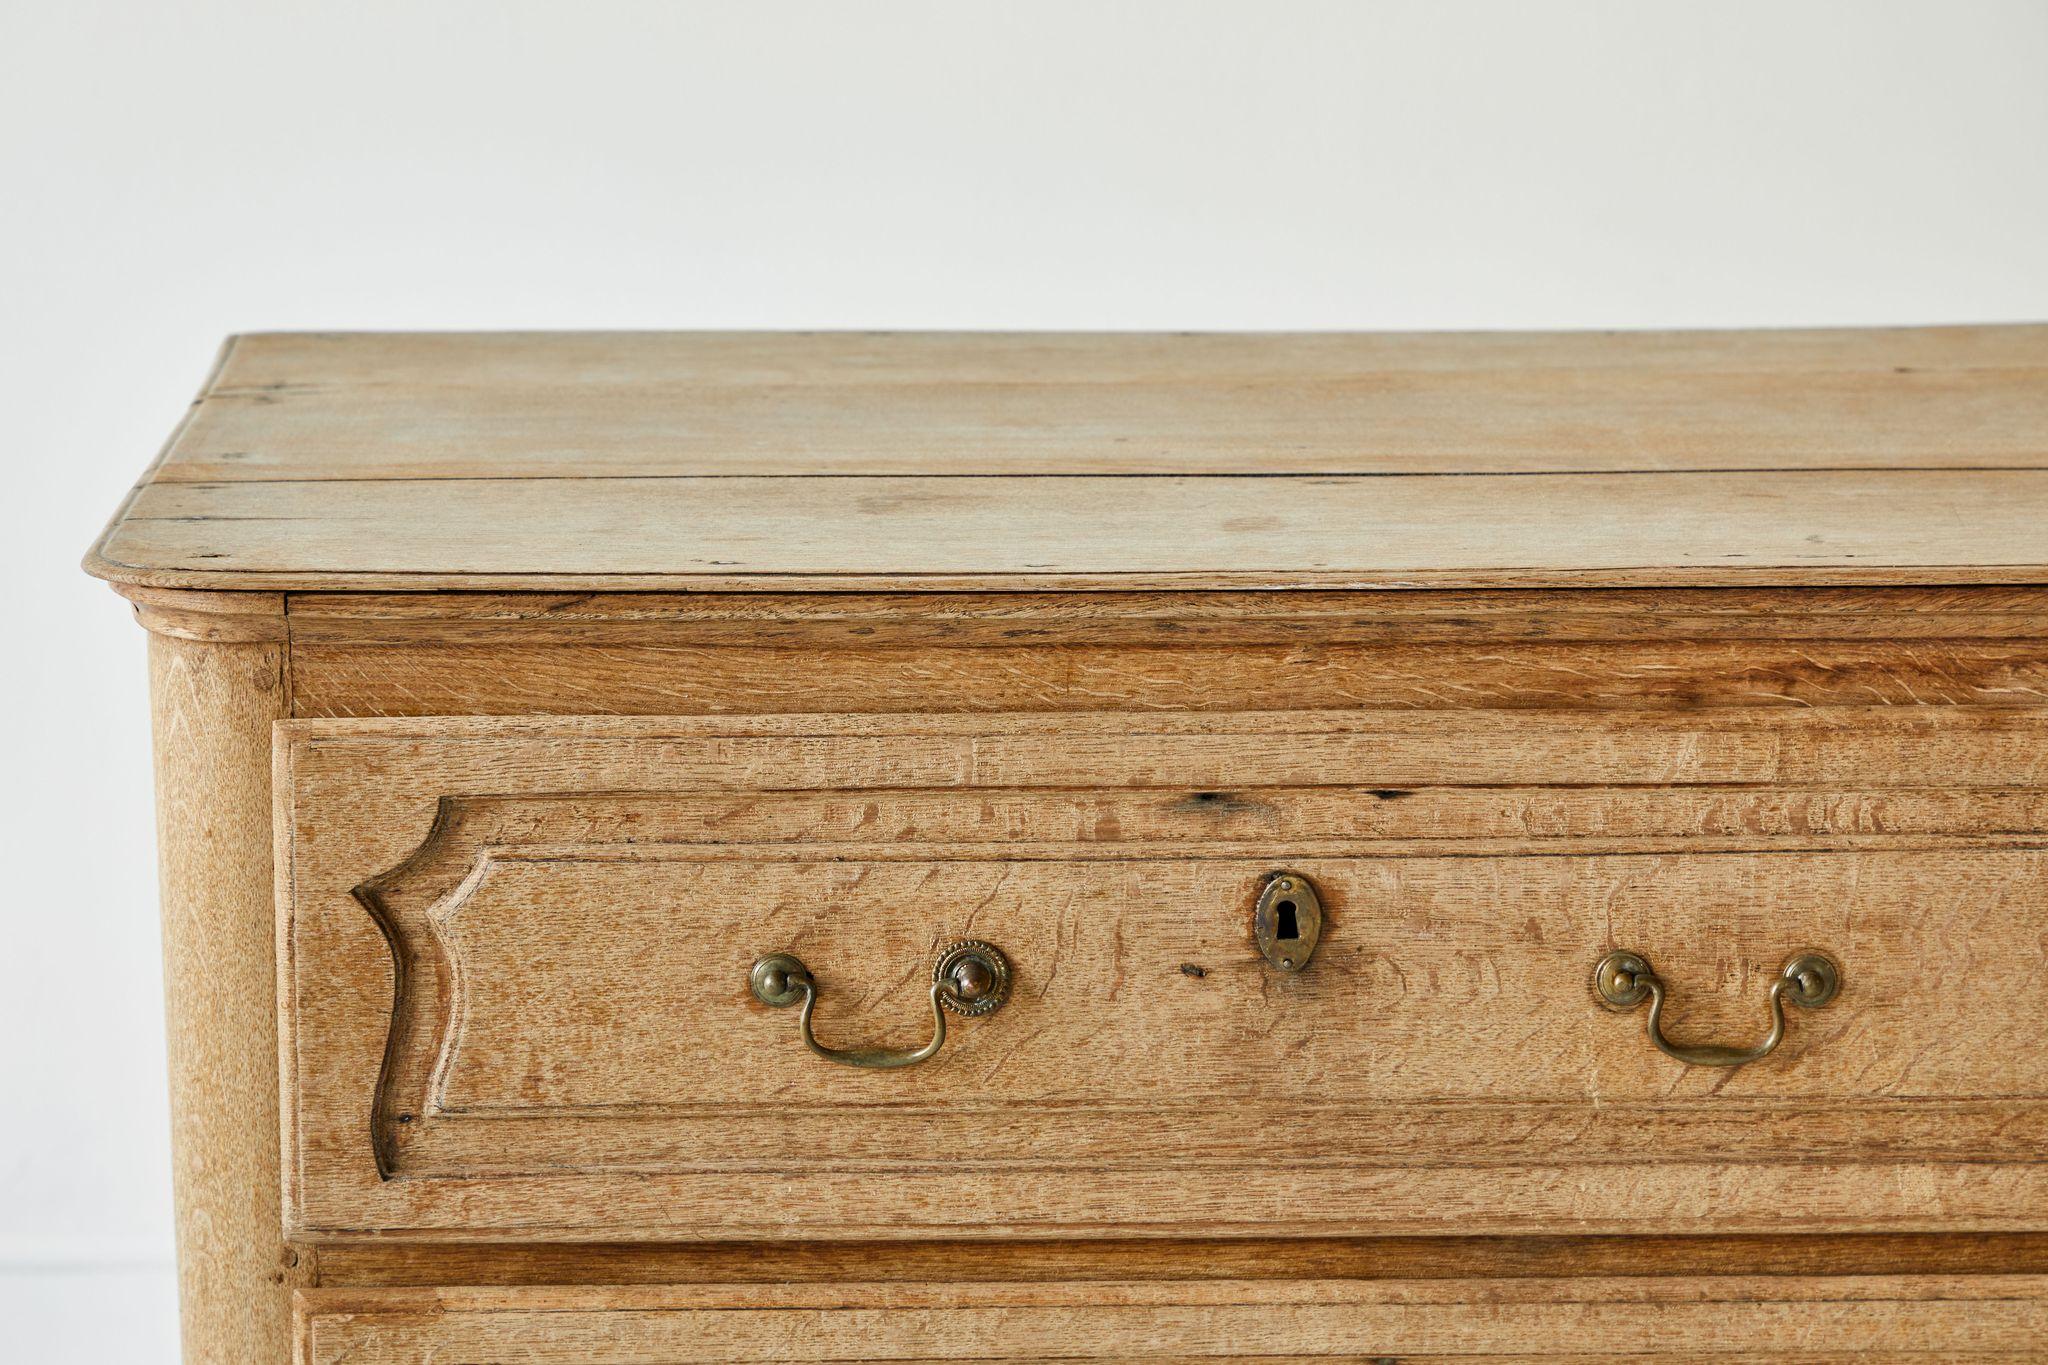 French oak three-drawer chest of drawer with scrolled details and original hardware. The finish is original and has not been altered.